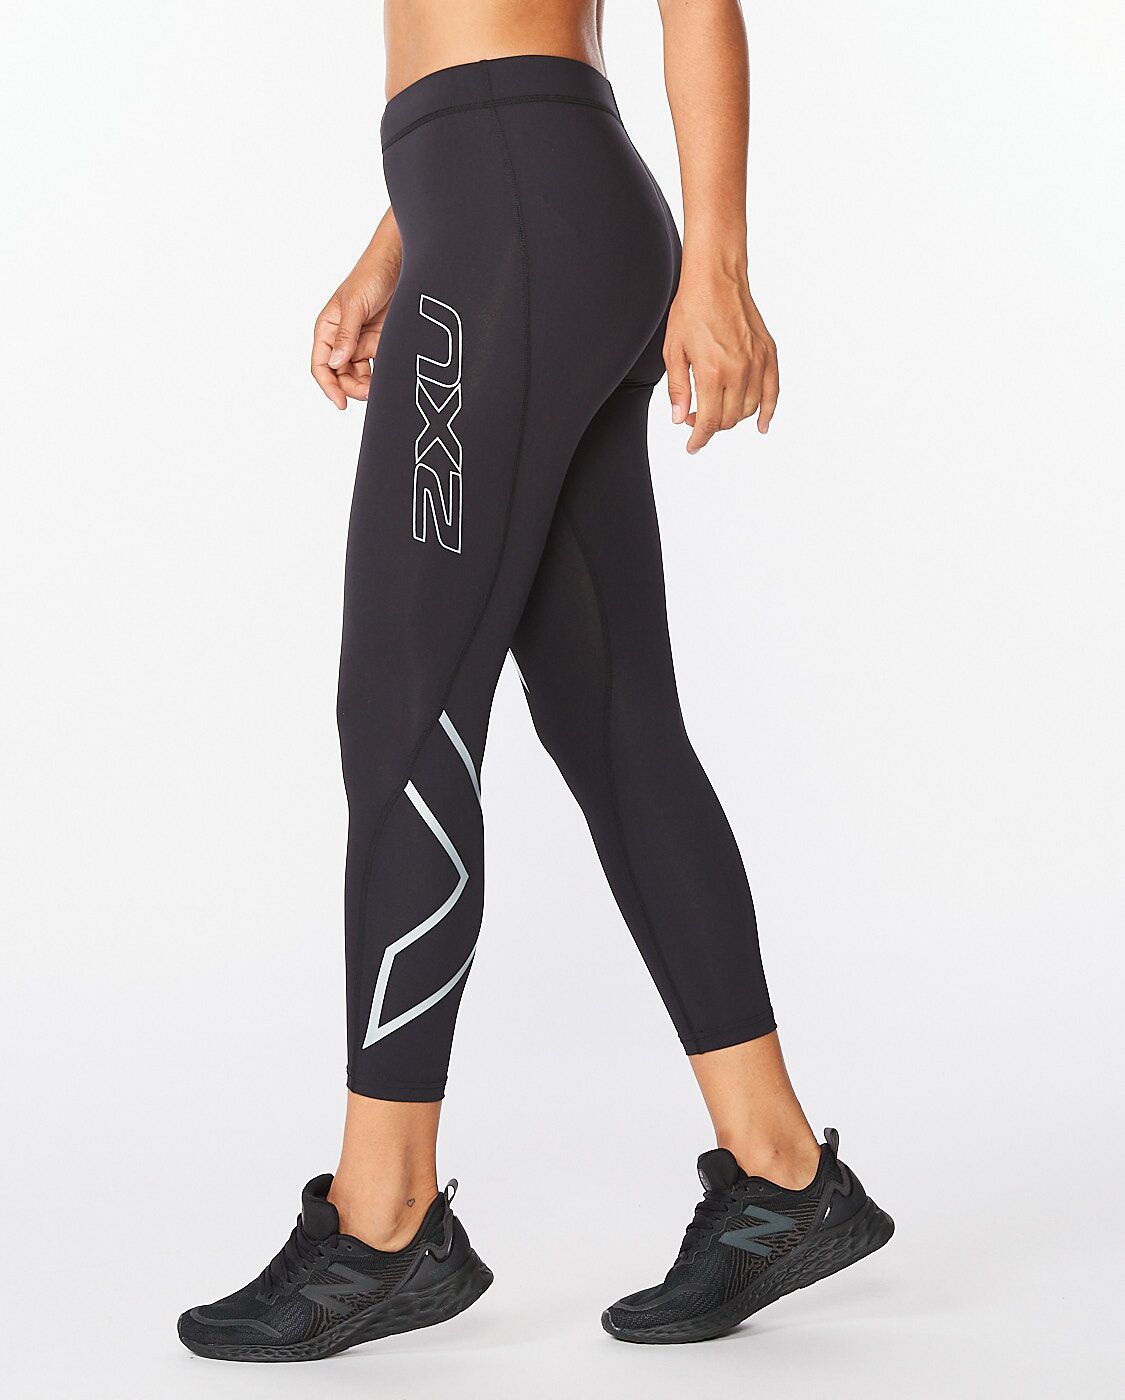 2XU South Africa - Womens Core Compression 7/8 Tights - Black/Silver